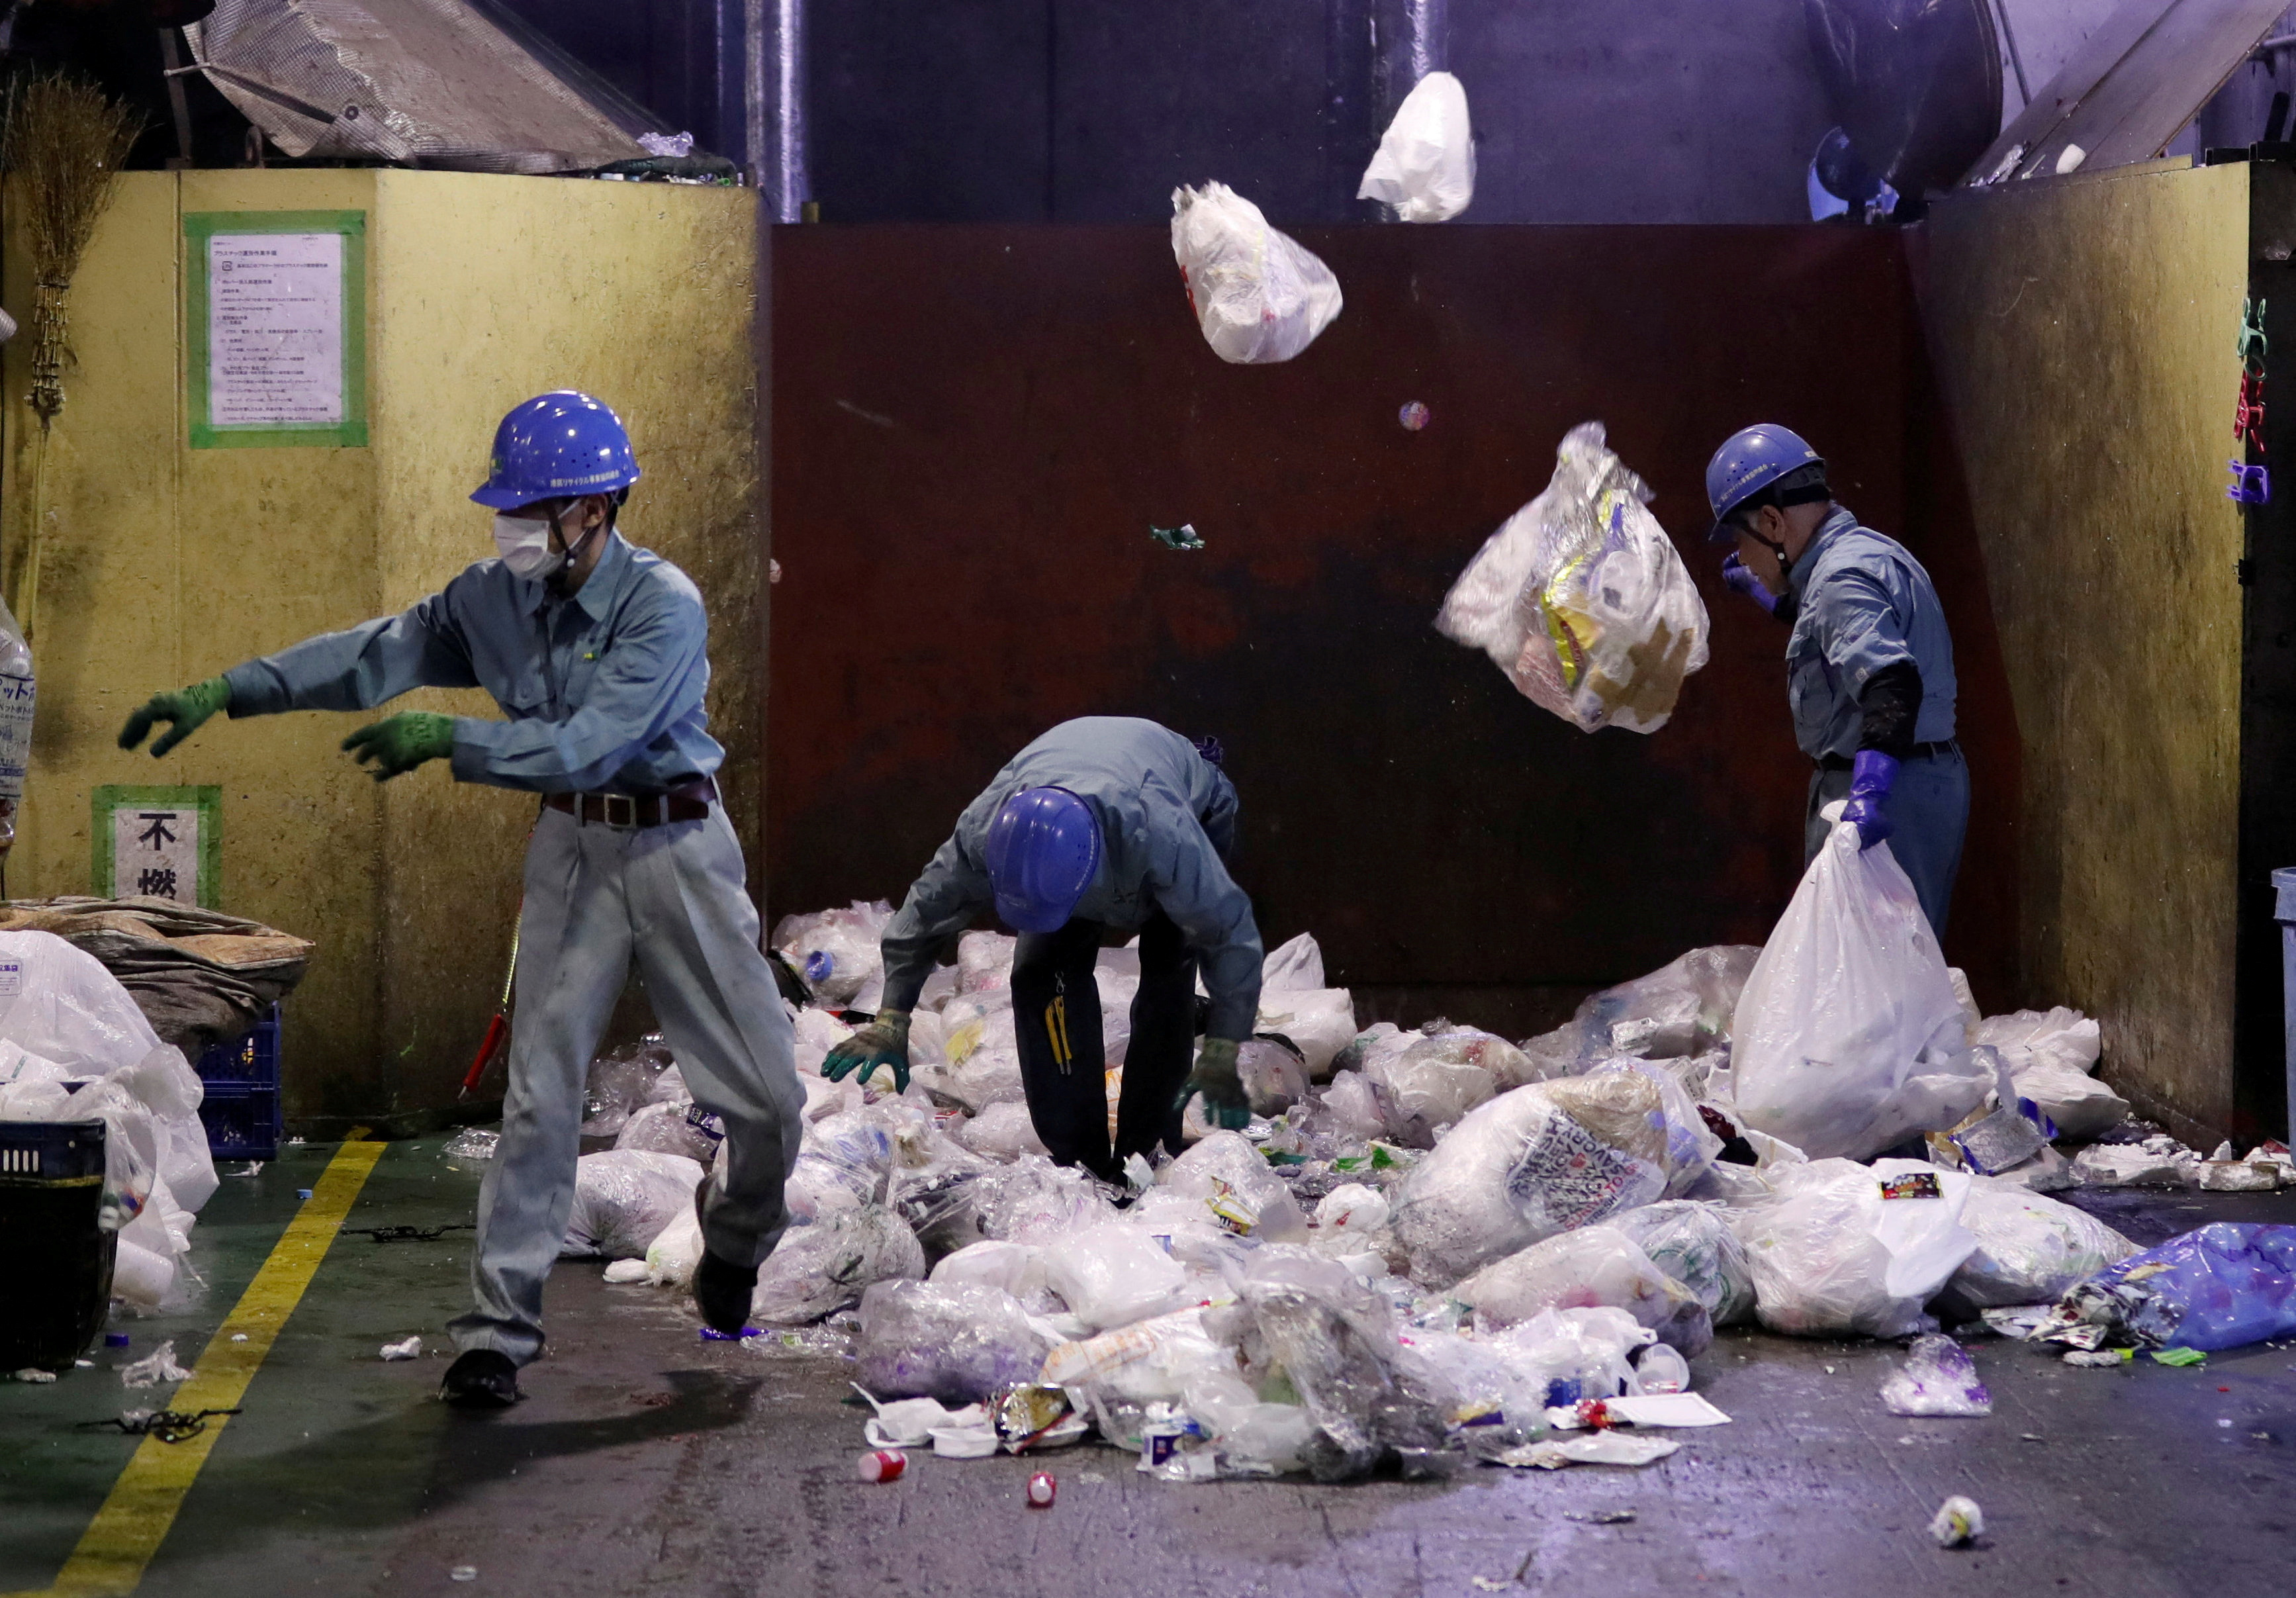 Workers sort out plastic waste for recycling at Minato Resource Recycle Center in Tokyo